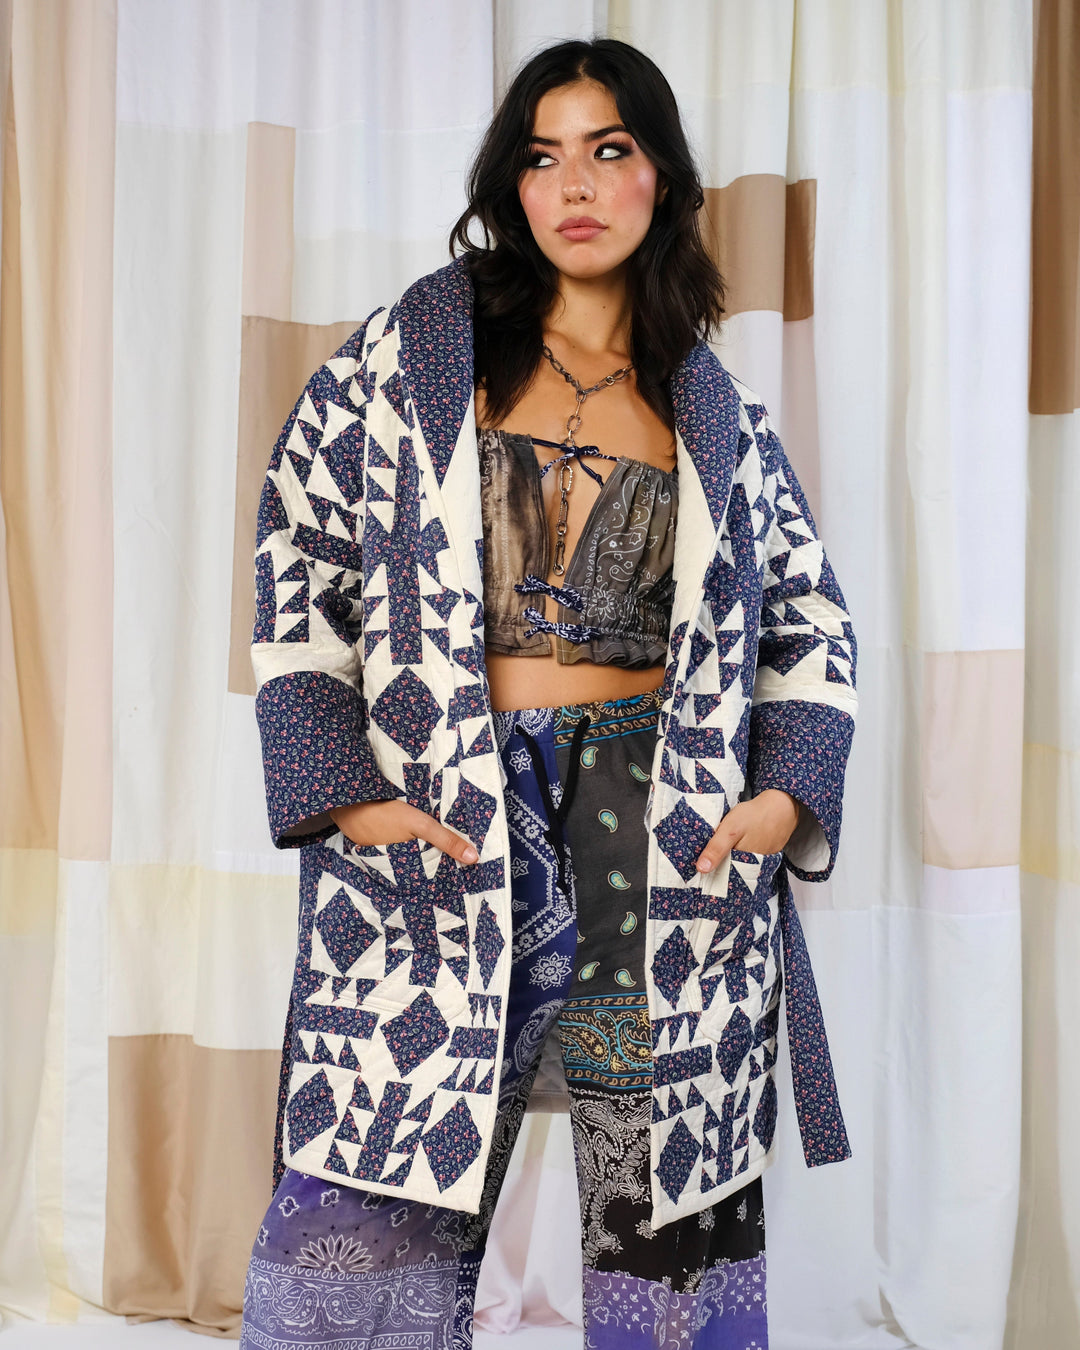 Hand Tied Polyester Quilt Robe Coat